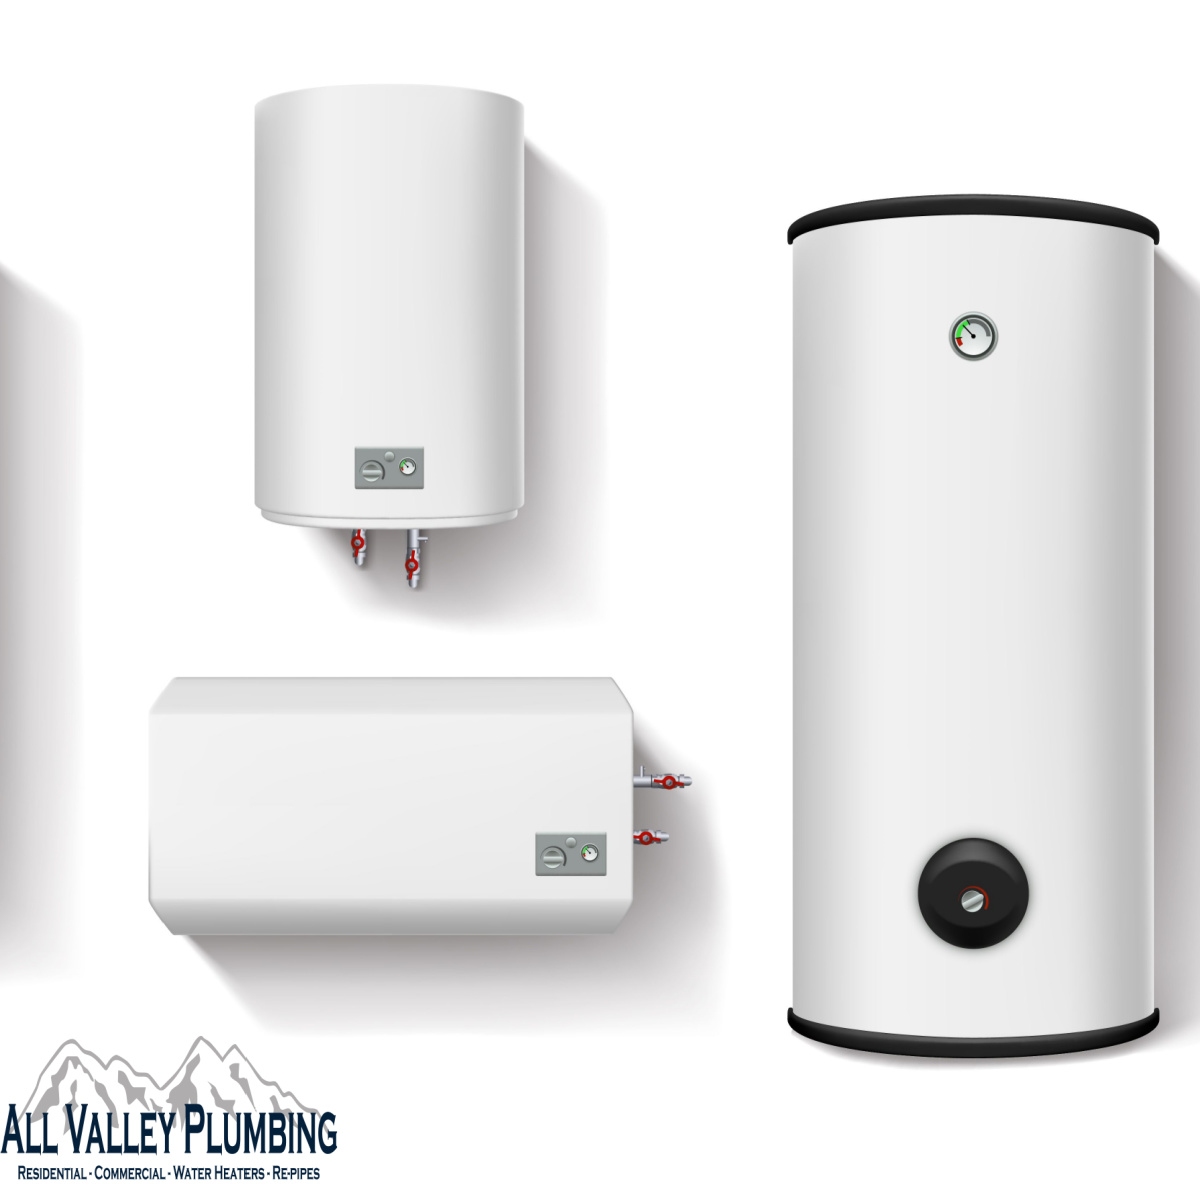 Schedule Your Granite Falls Tankless Hot Water Heater Service Or Repair Today